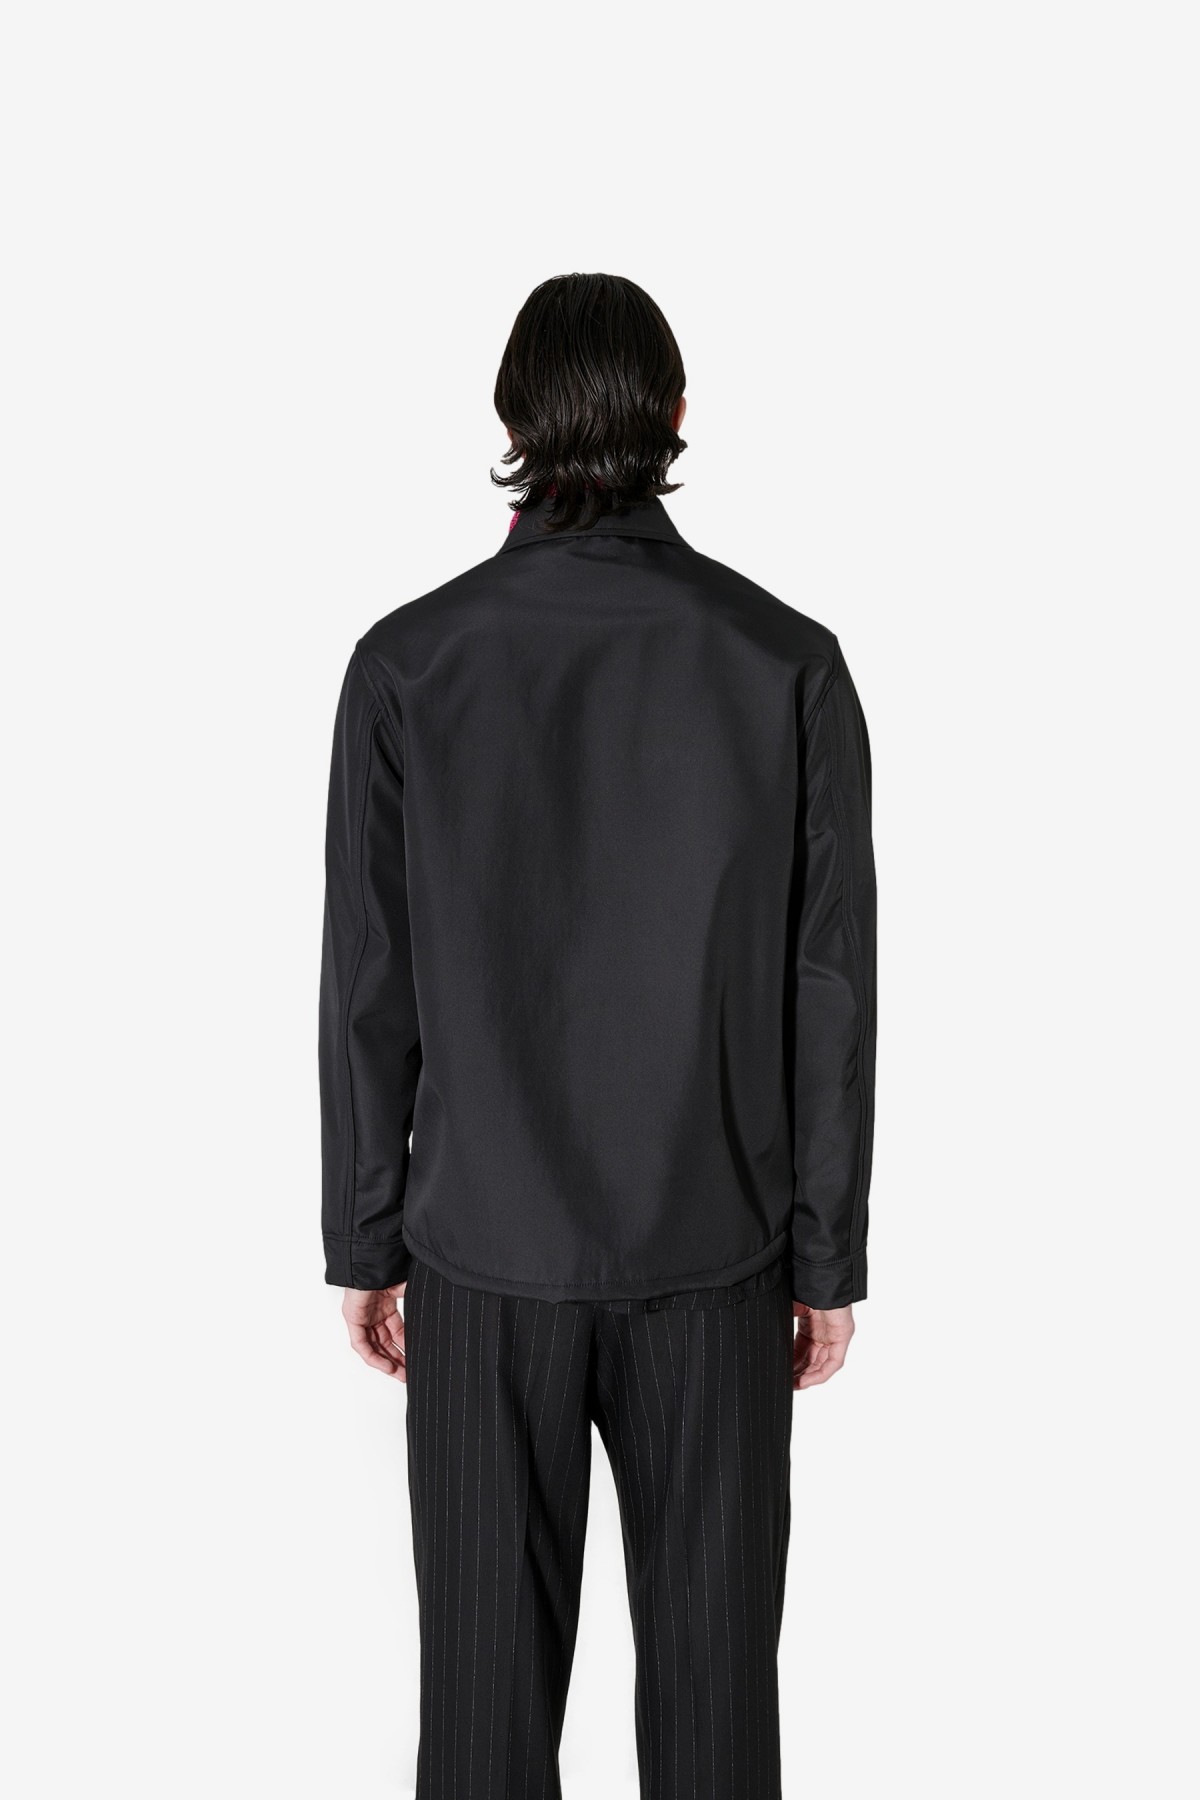 Our Legacy Evening Coach Jacket in Black Fleecy Tech